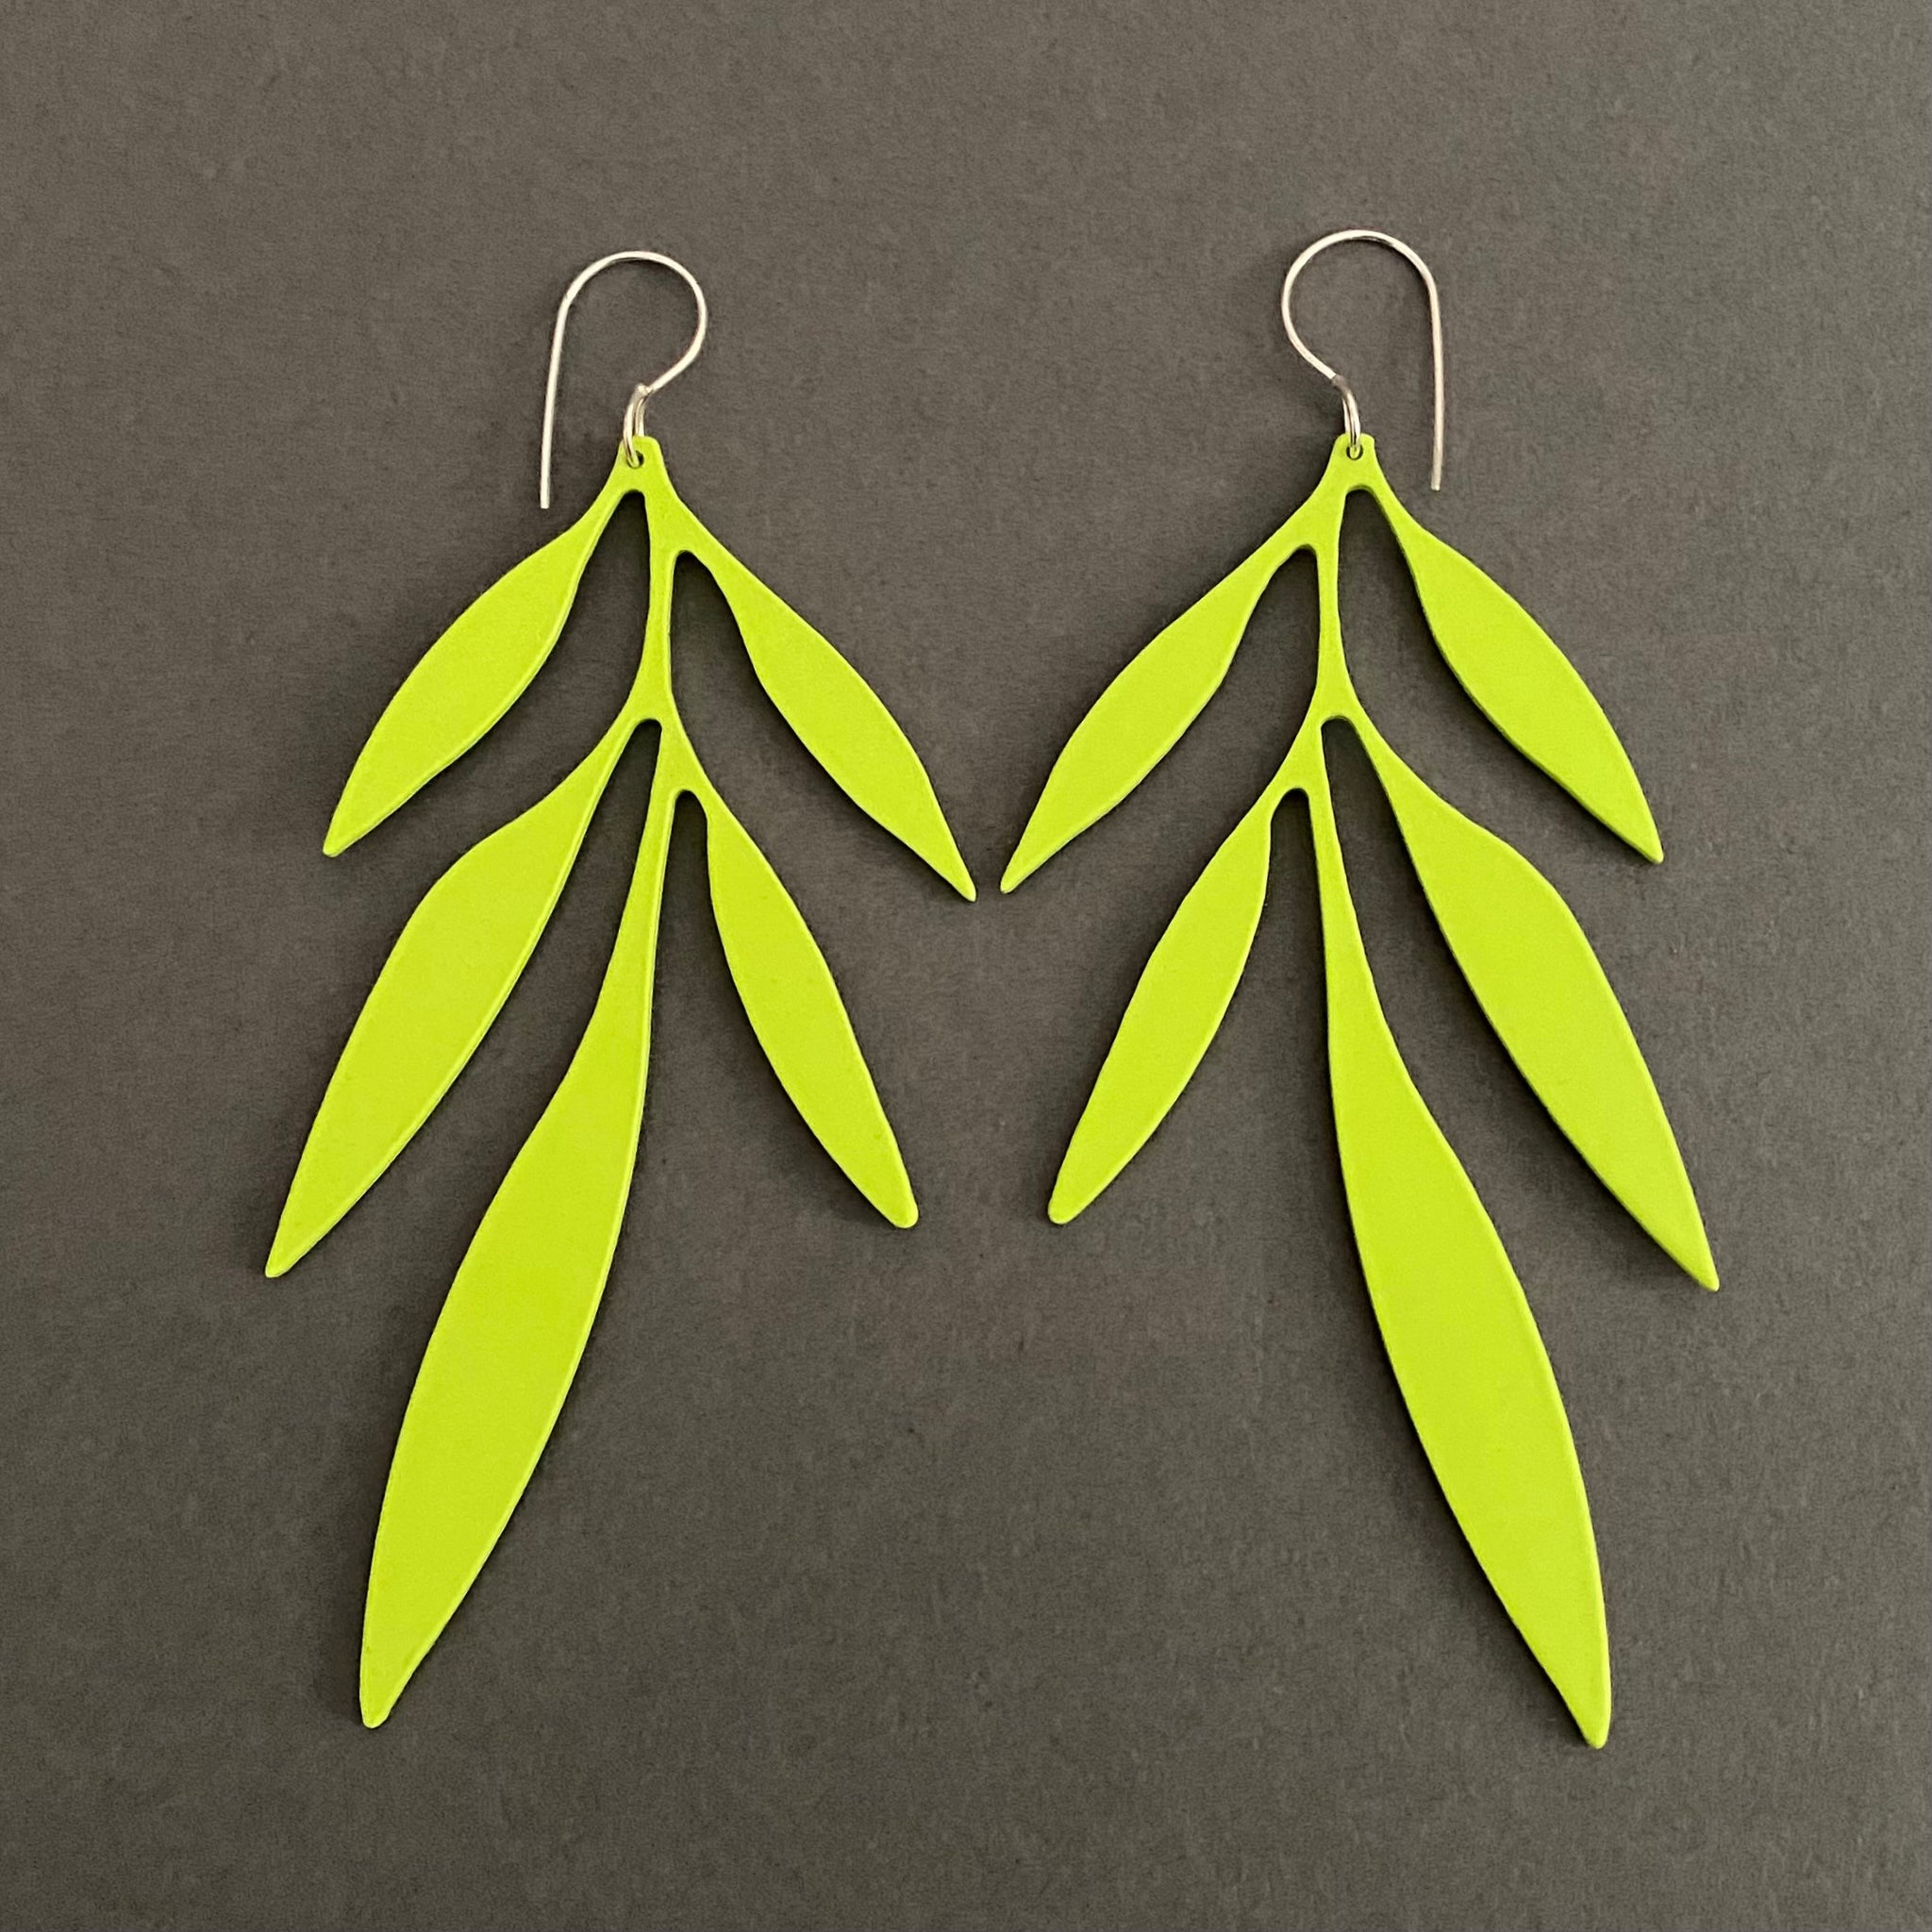 Branch Earrings - Large, Chartreuse